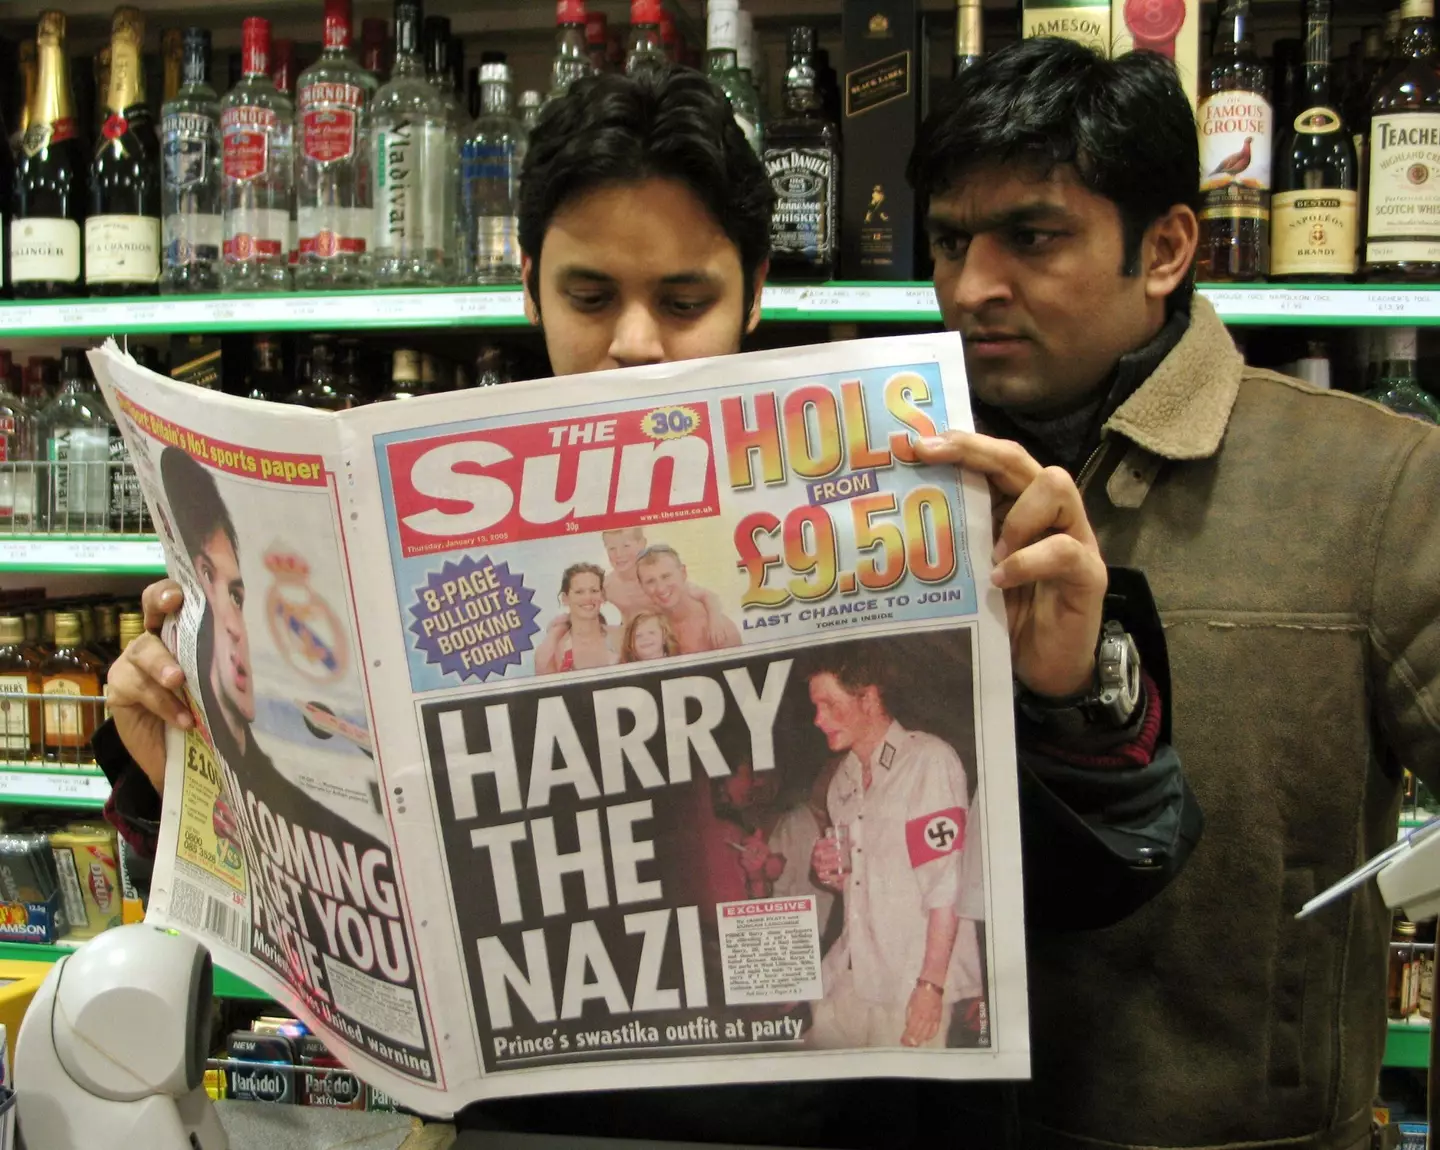 Prince Harry dressing as a Nazi for a fancy dress party in 2005 was met with backlash from onlookers.